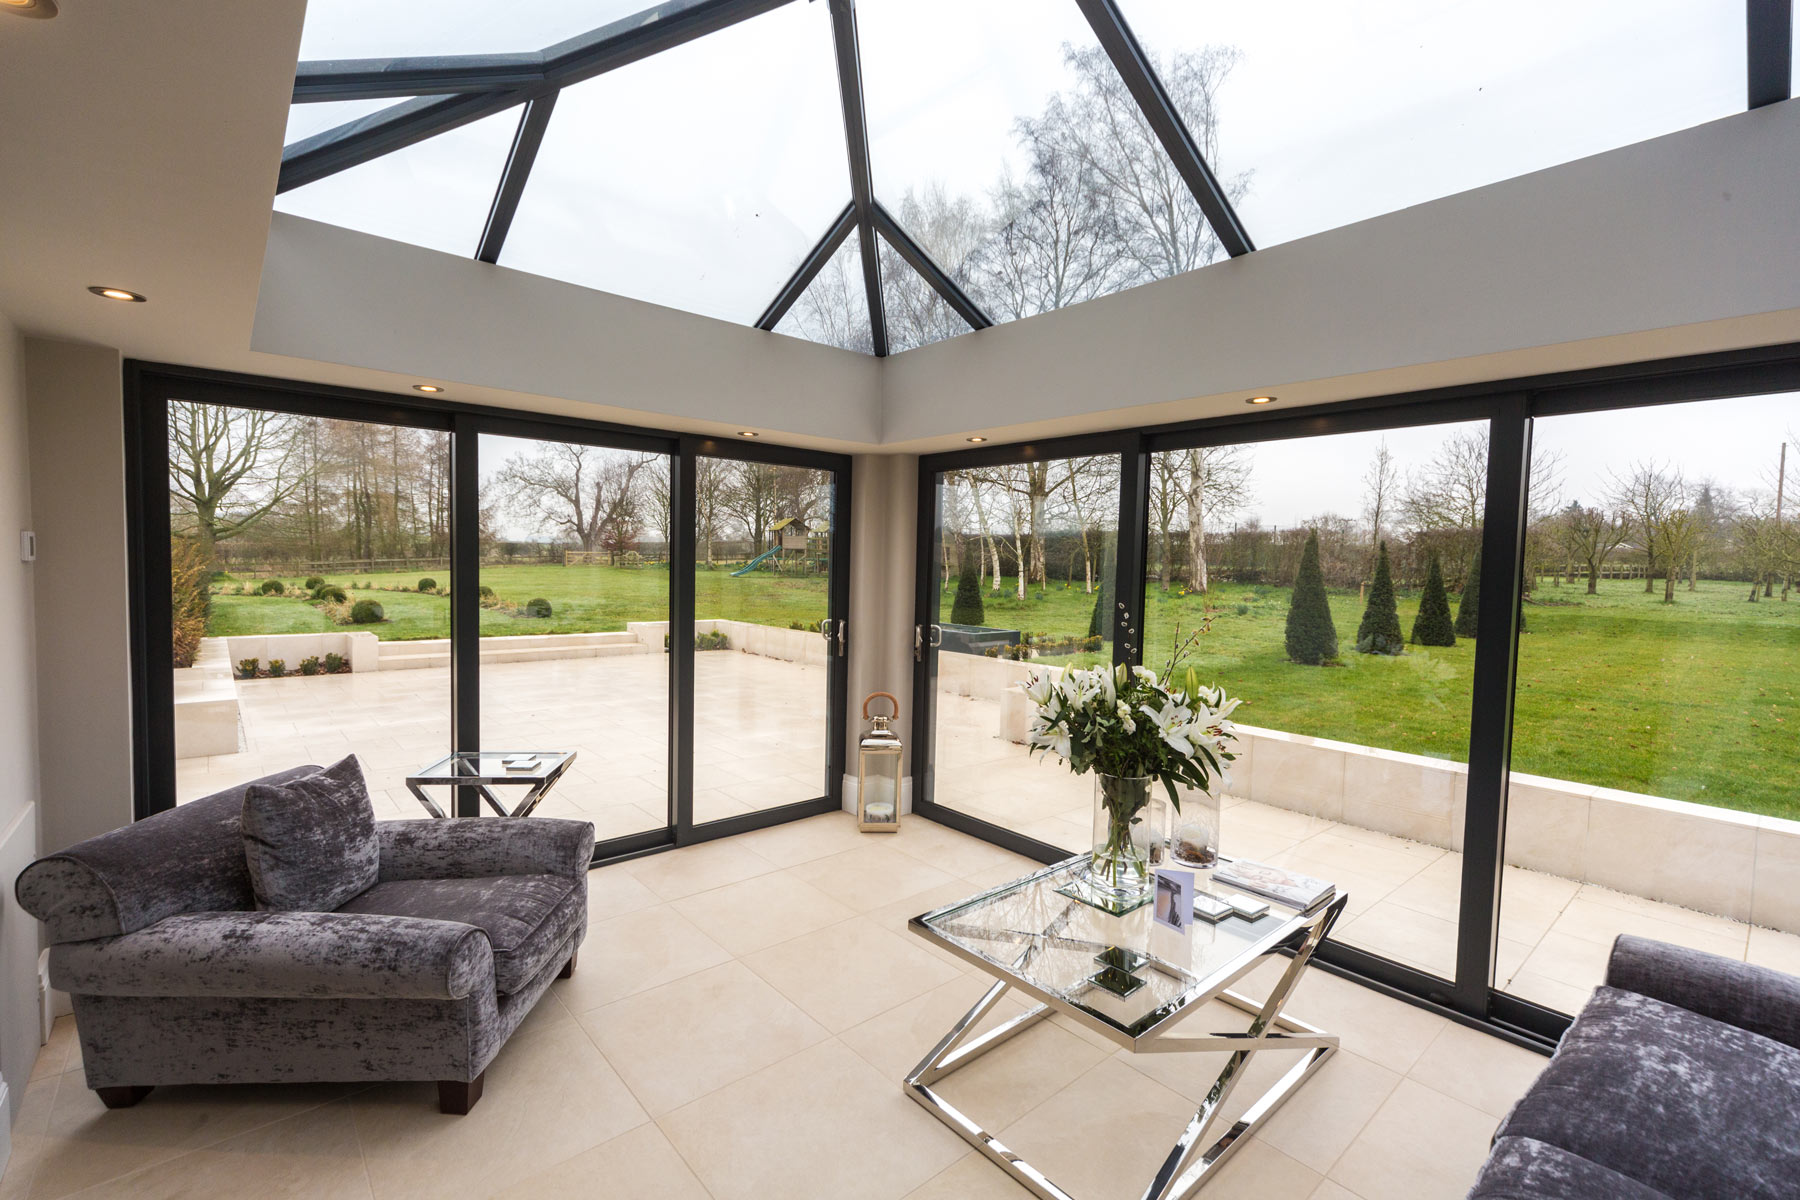 Conservatory Installers West London